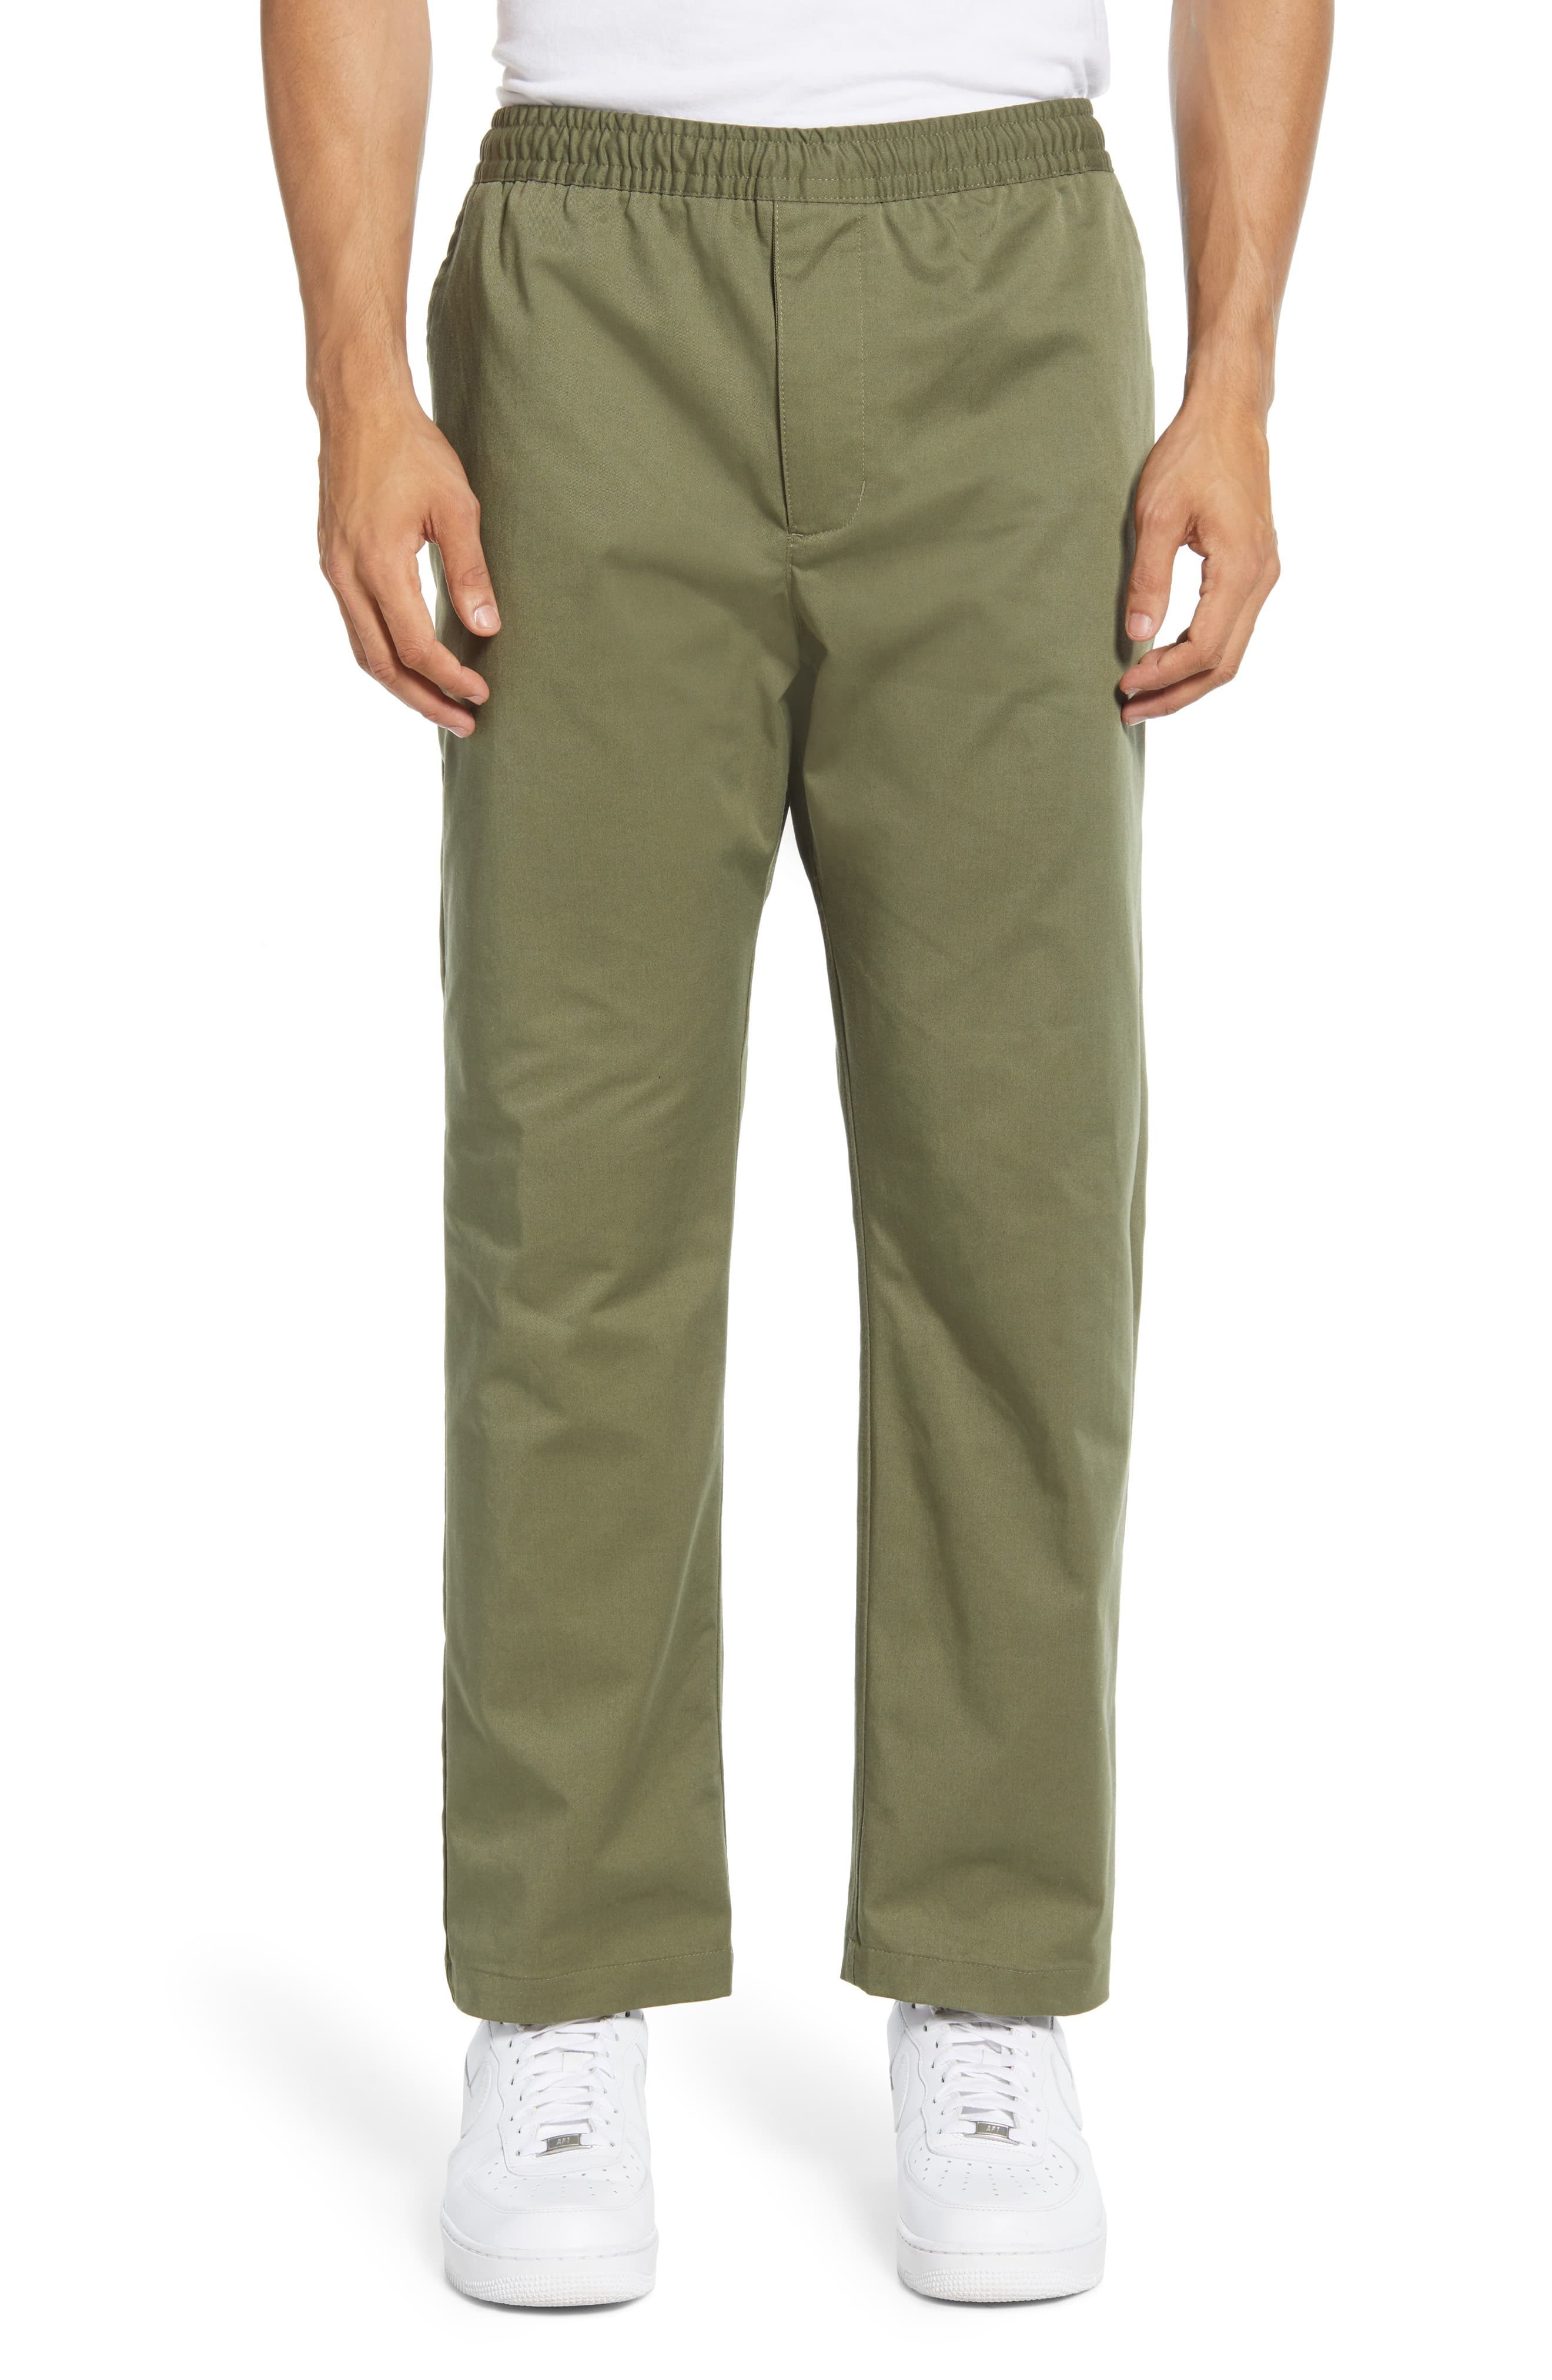 banner Money rubber only Nike SB Dri Fit Chino Pants, $30 | Nordstrom | Lookastic